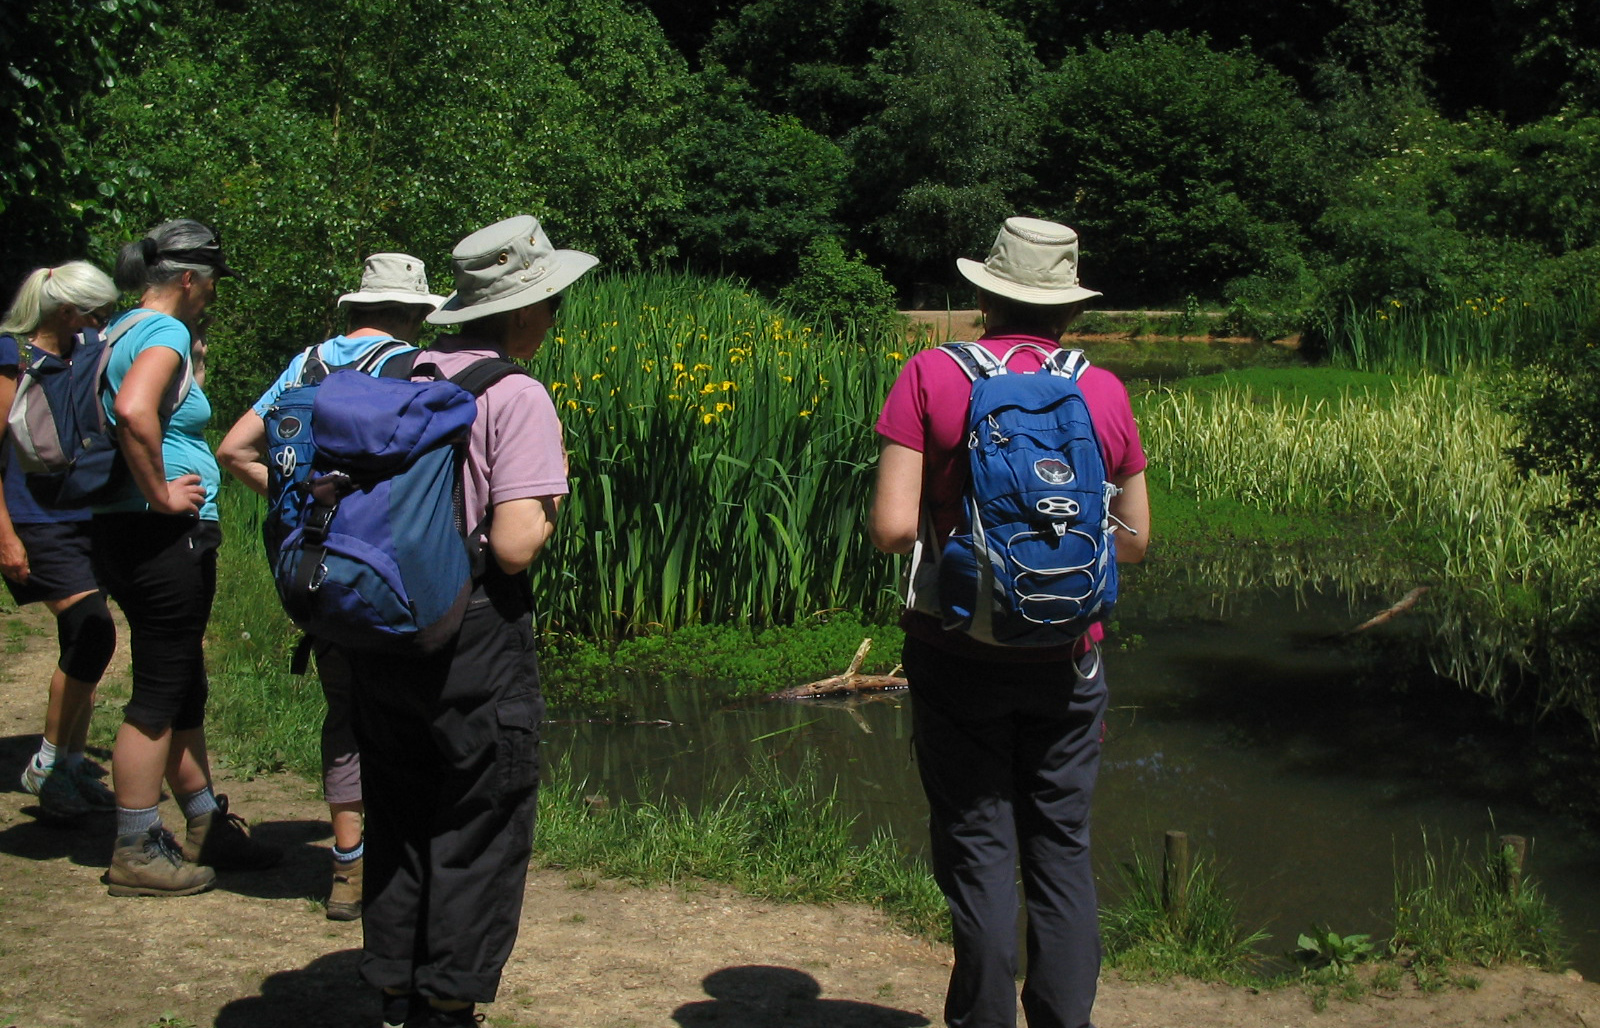 group of women walkers in the summer sunshine, pausing by a pond, with lush greenery